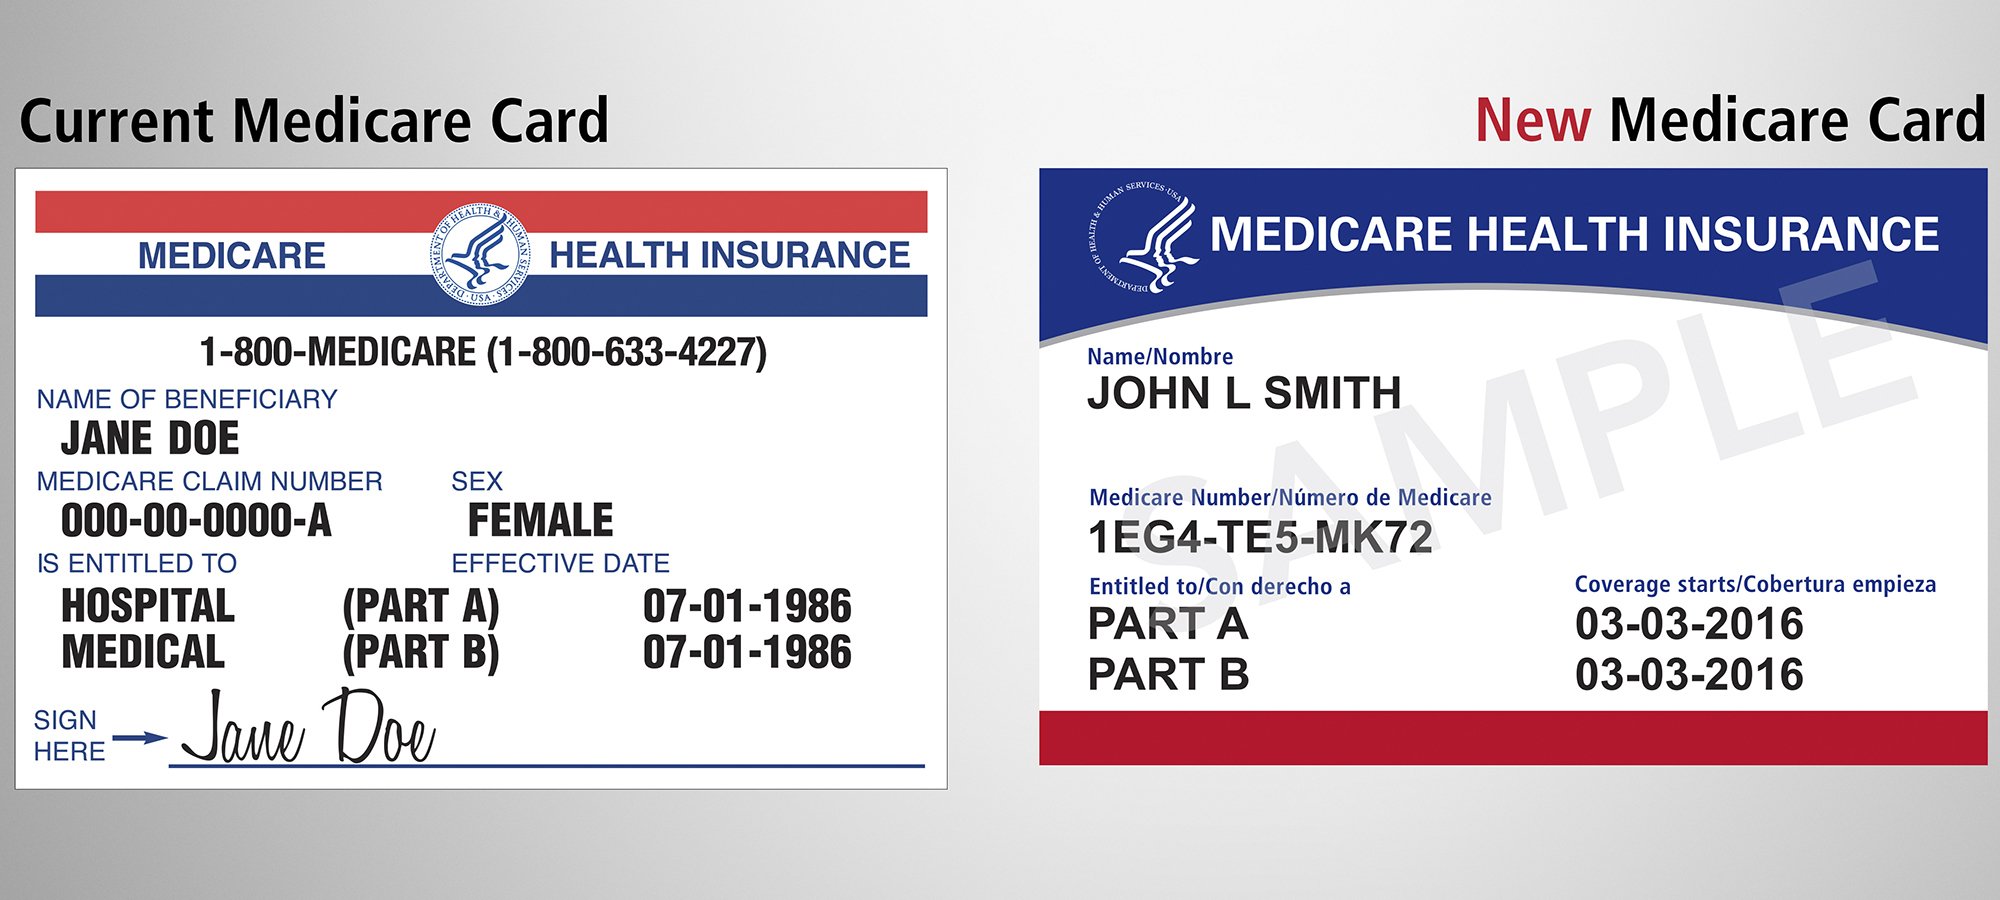 Get Ready! Medicare Will Mail New Cards to 60 Million People